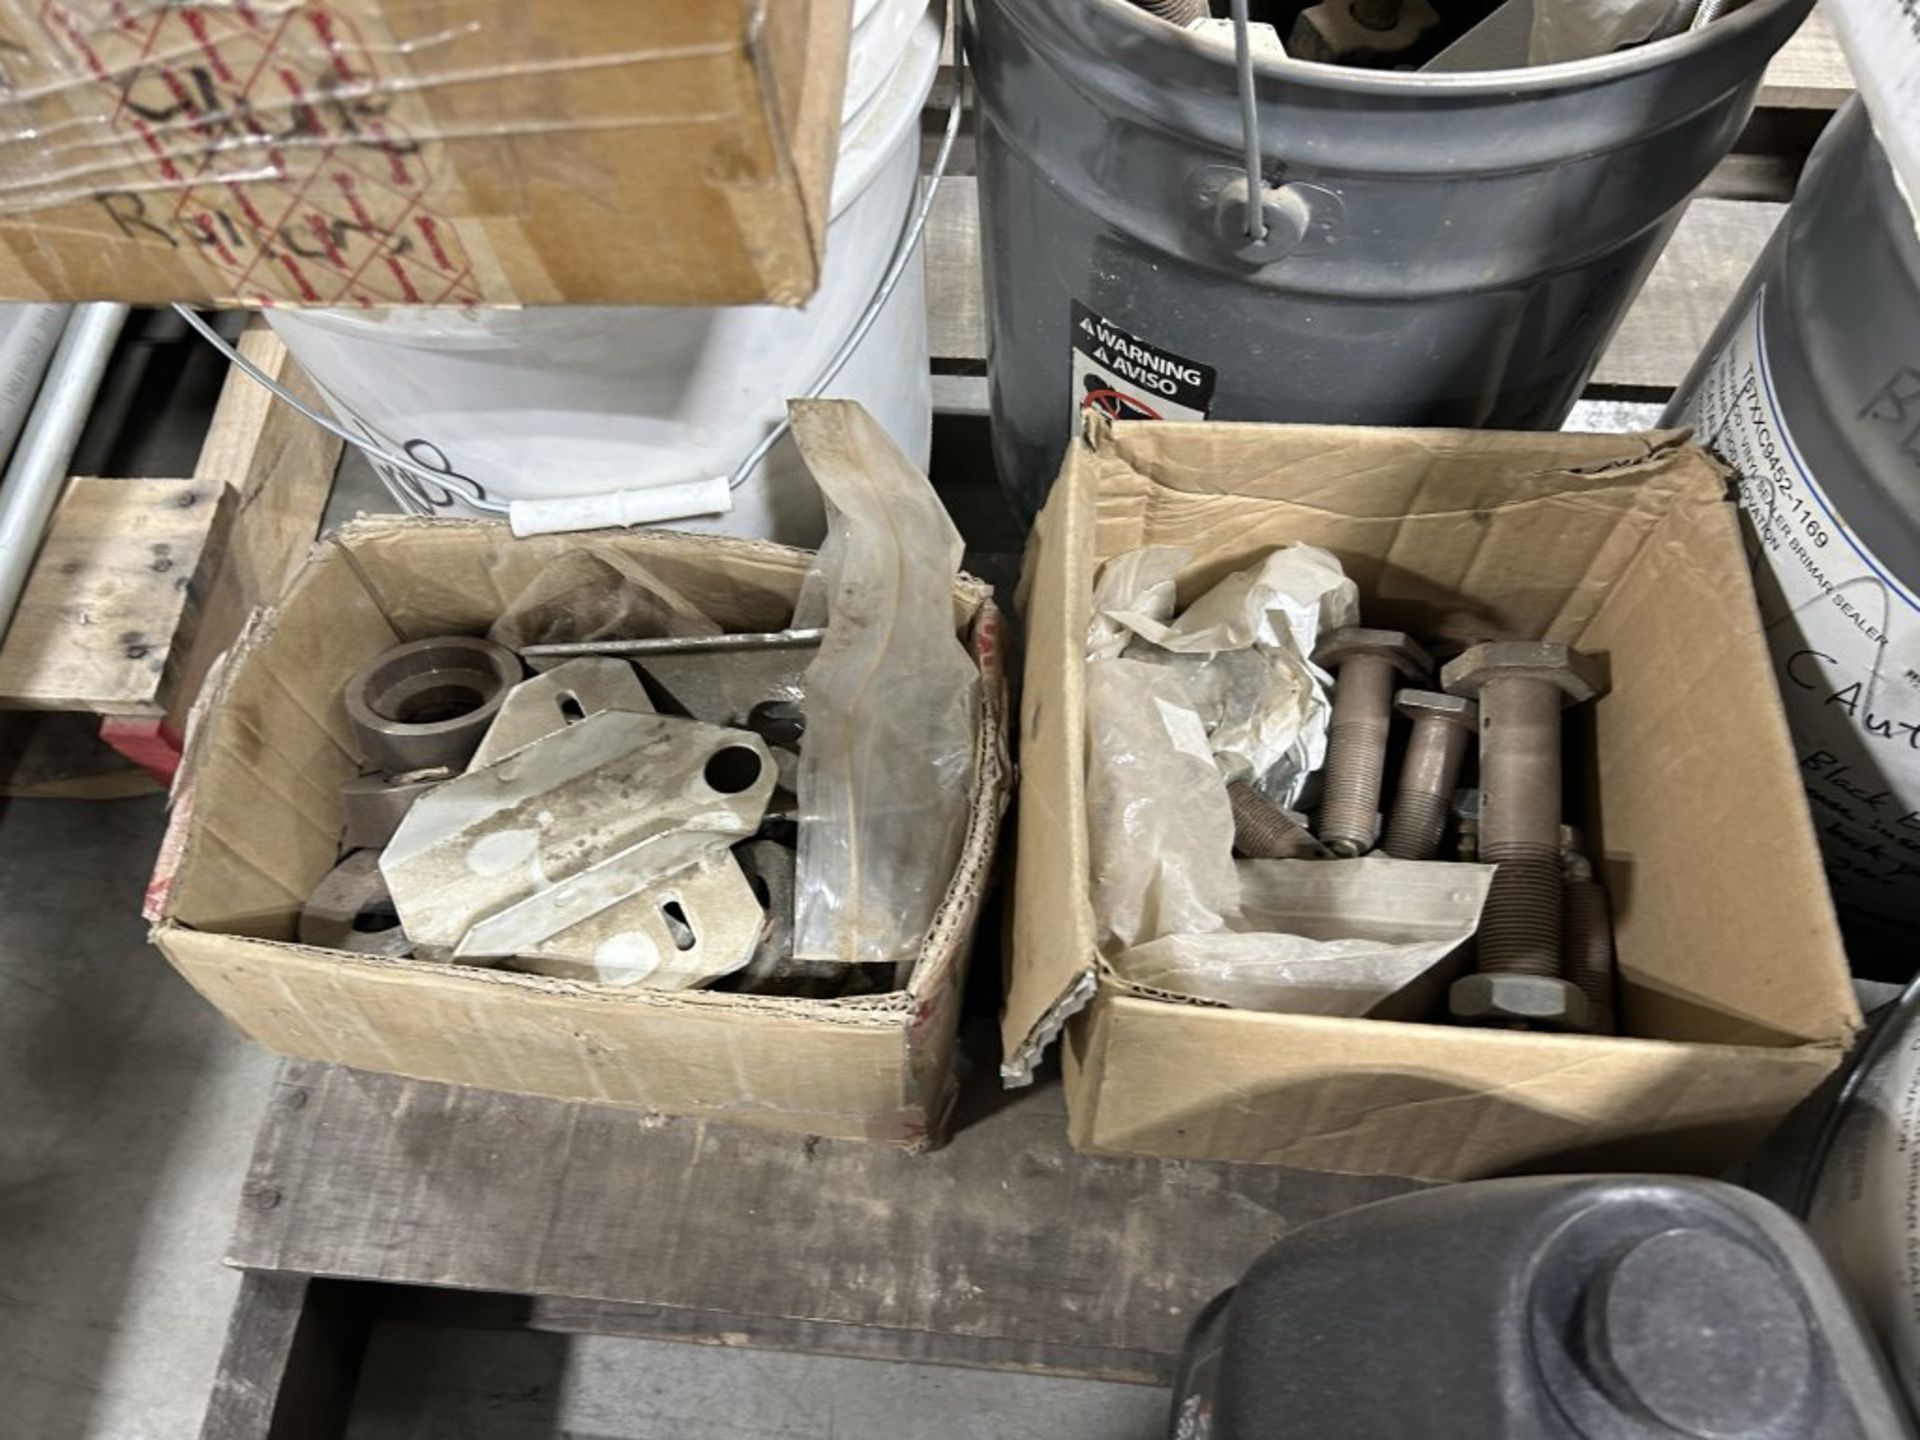 PALLET FULL OF (5) 5-GALLON BUCKETS OF HYDRAULIC OIL, BUCKET WITH CHAIN, LARGE BOLTS, ETC. - Image 5 of 8